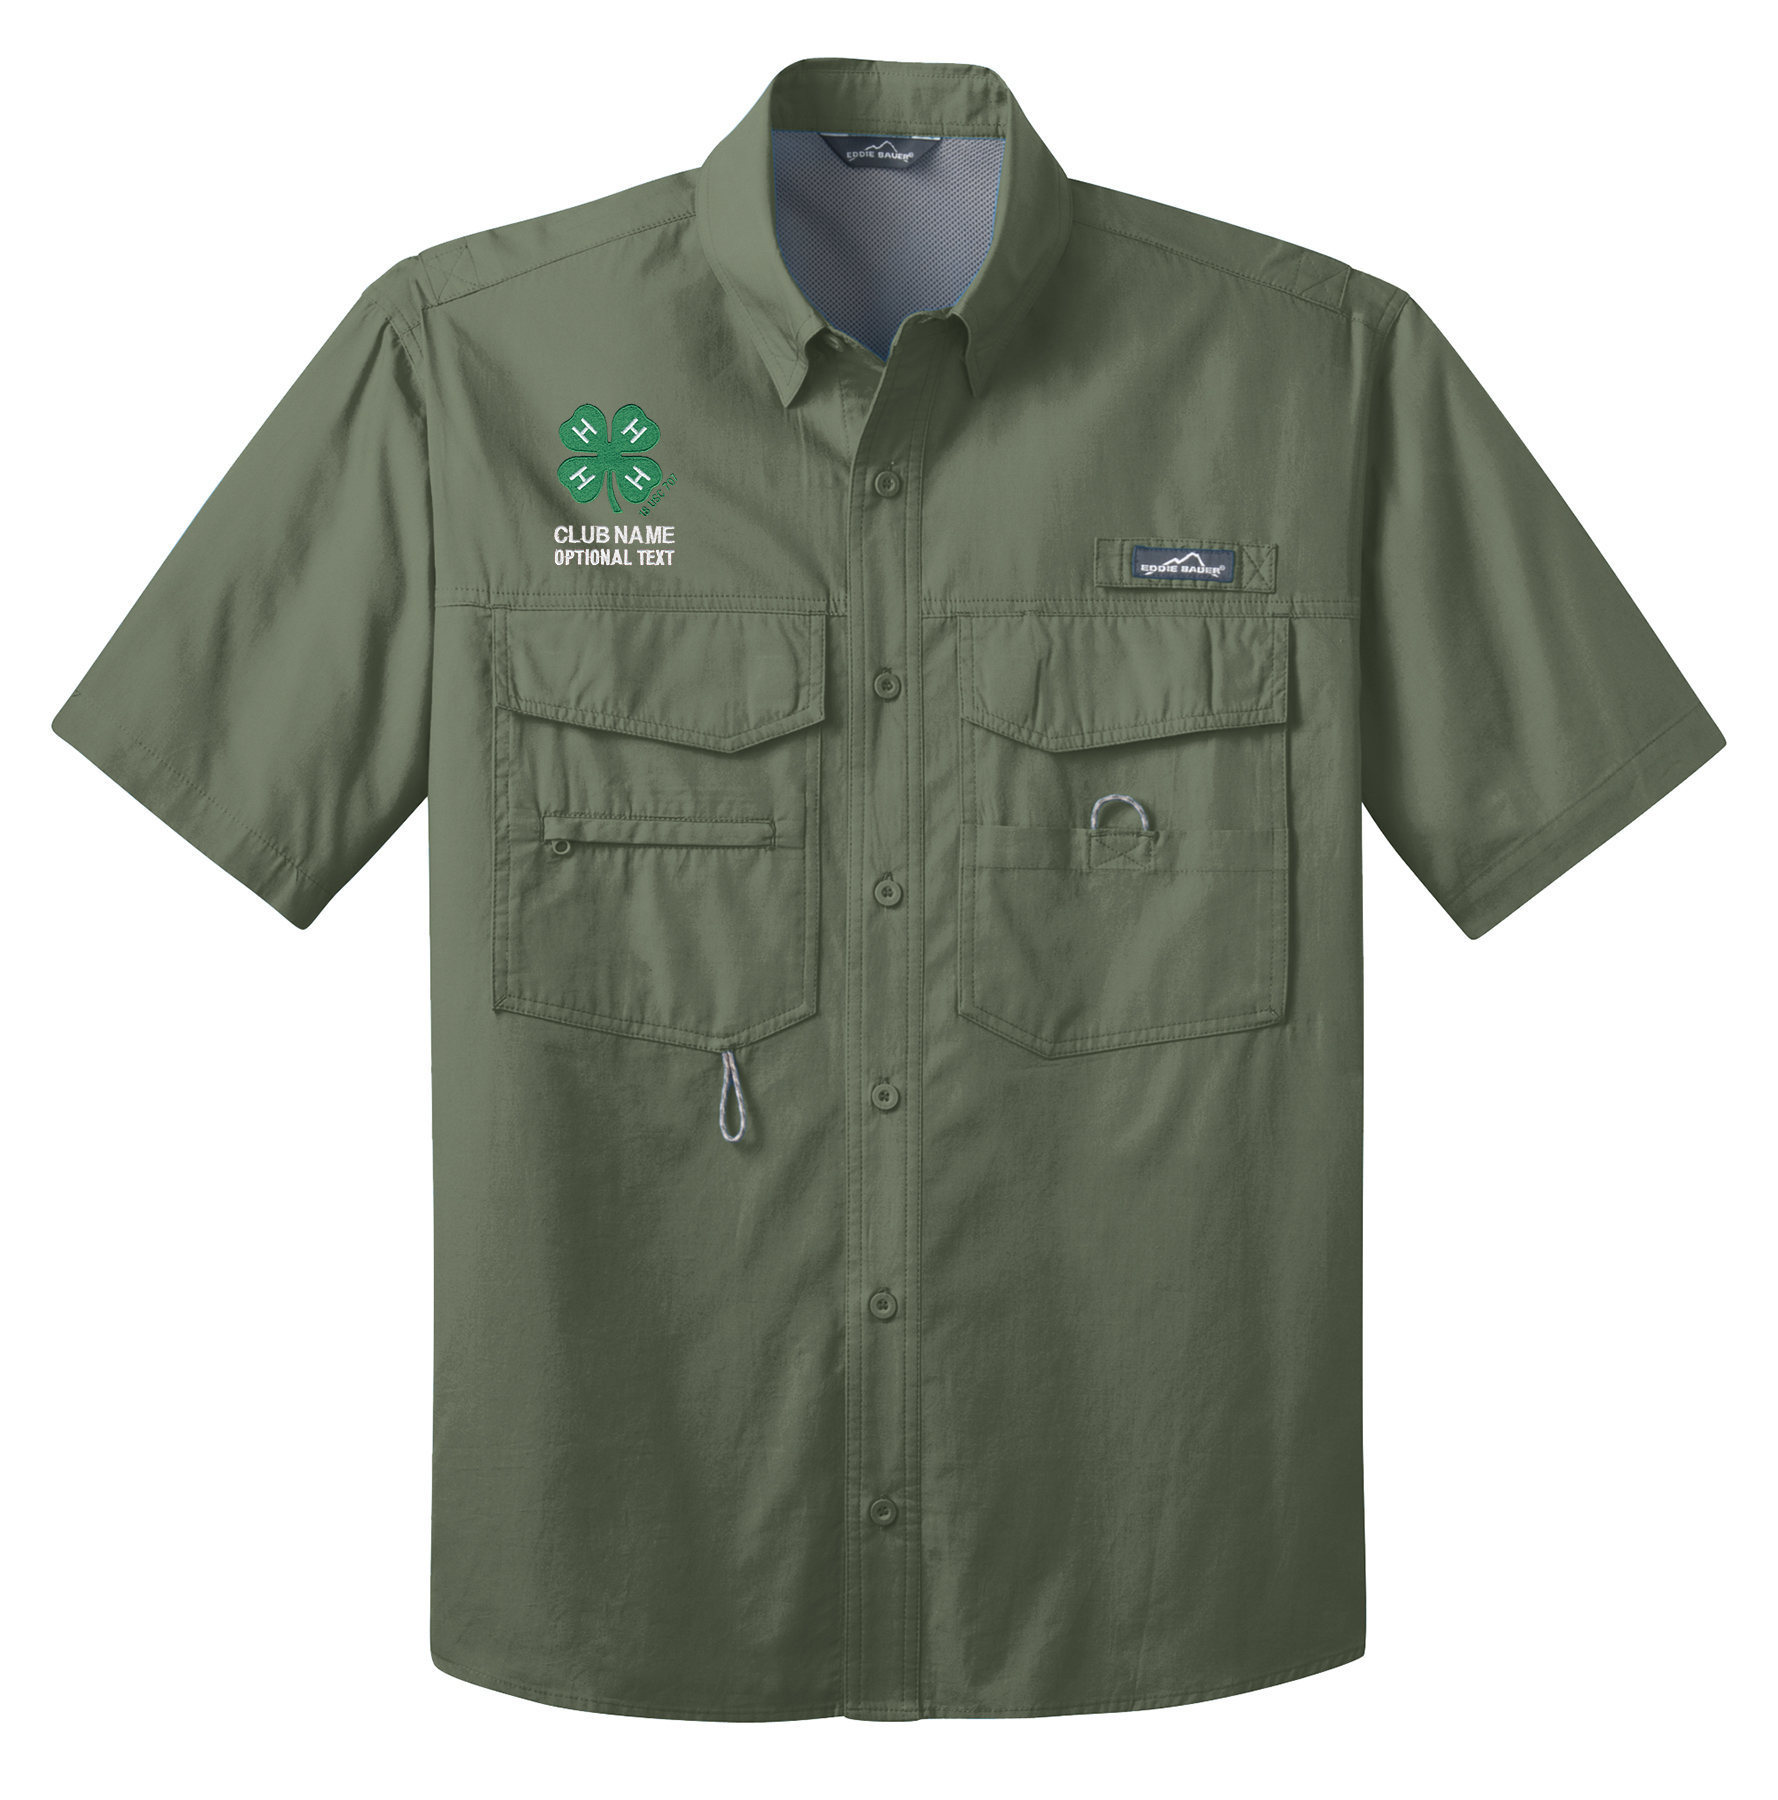 Eddie Bauer – Short Sleeve Fishing Shirt with Embroidered 4-H Logo - Seagrass Green, 3X Large